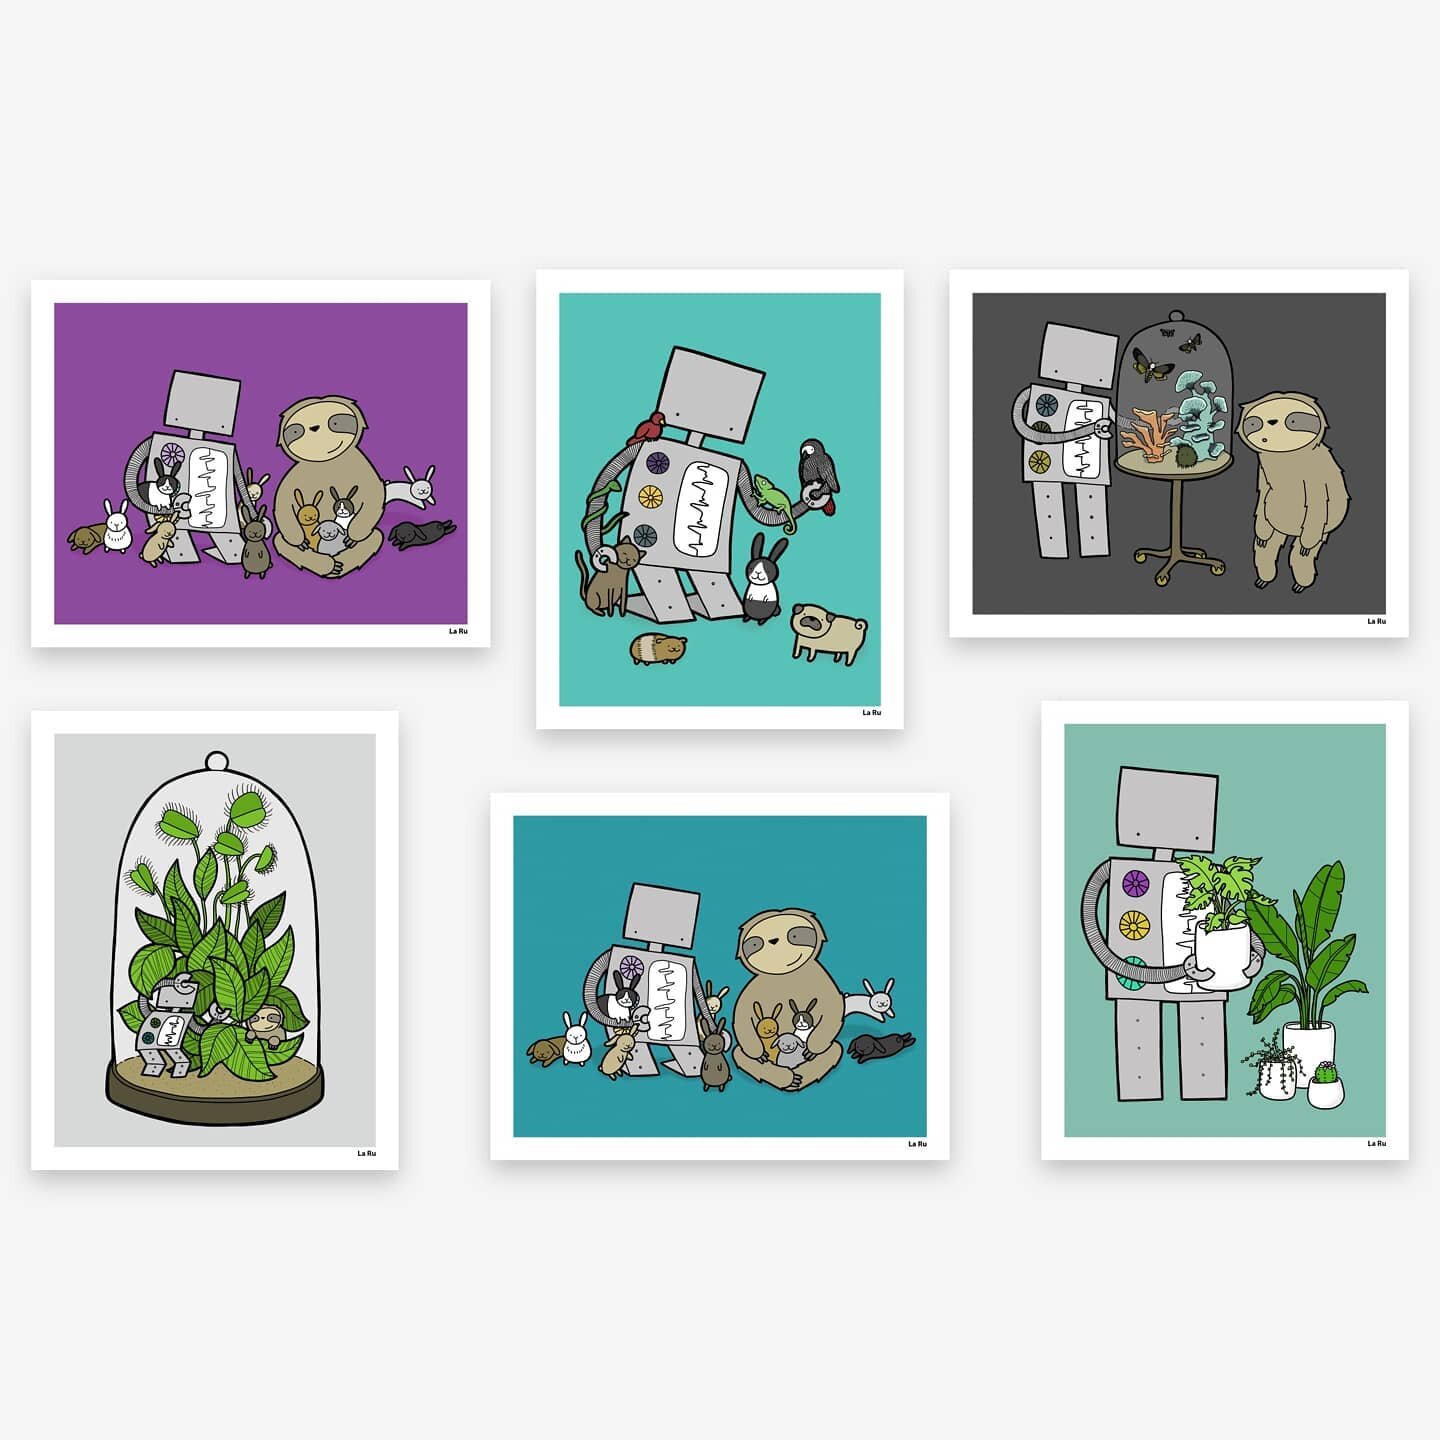 New La Ru prints now available online and in-store @robotvsloth. Prints are available in multiple sizes: 5x7, 8x10, and 11x14 inches.
⁠
Plus when you purchase either the purple or teal Robot vs Sloth Loves Bunnies Print (in any size), $5 of every pri